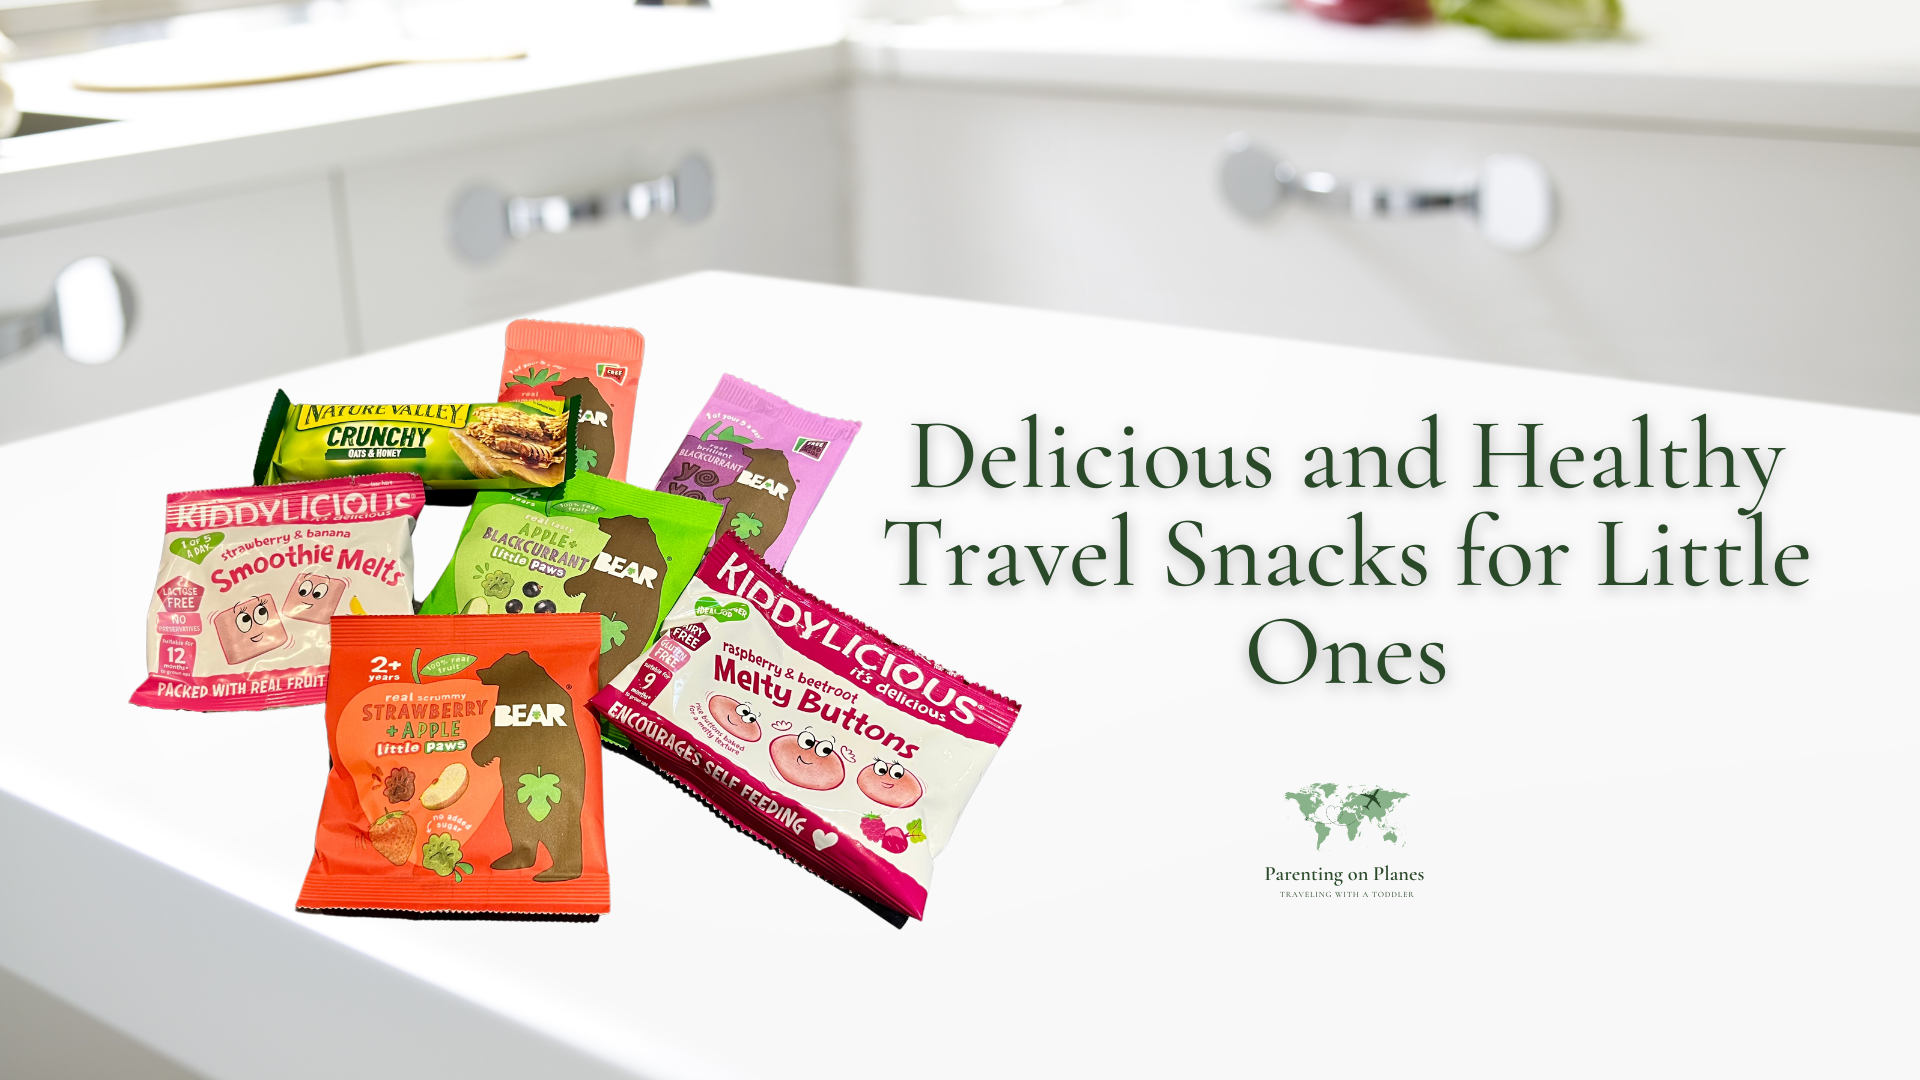 Delicious and Healthy Travel Snacks for Little Ones